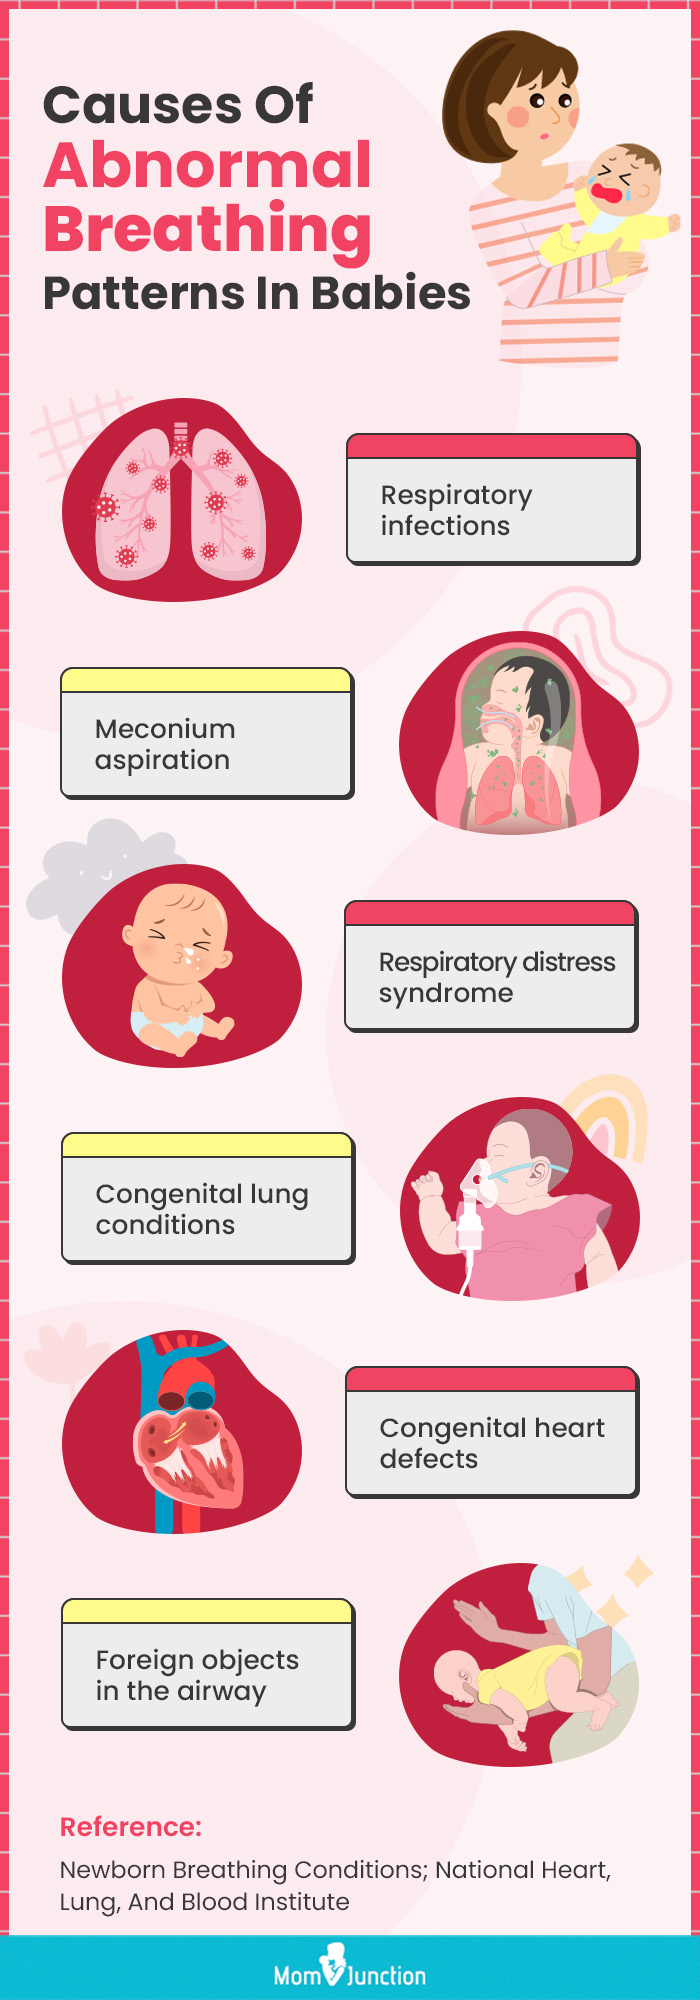 causes of abnormal breathing patterns in babies (infographic)